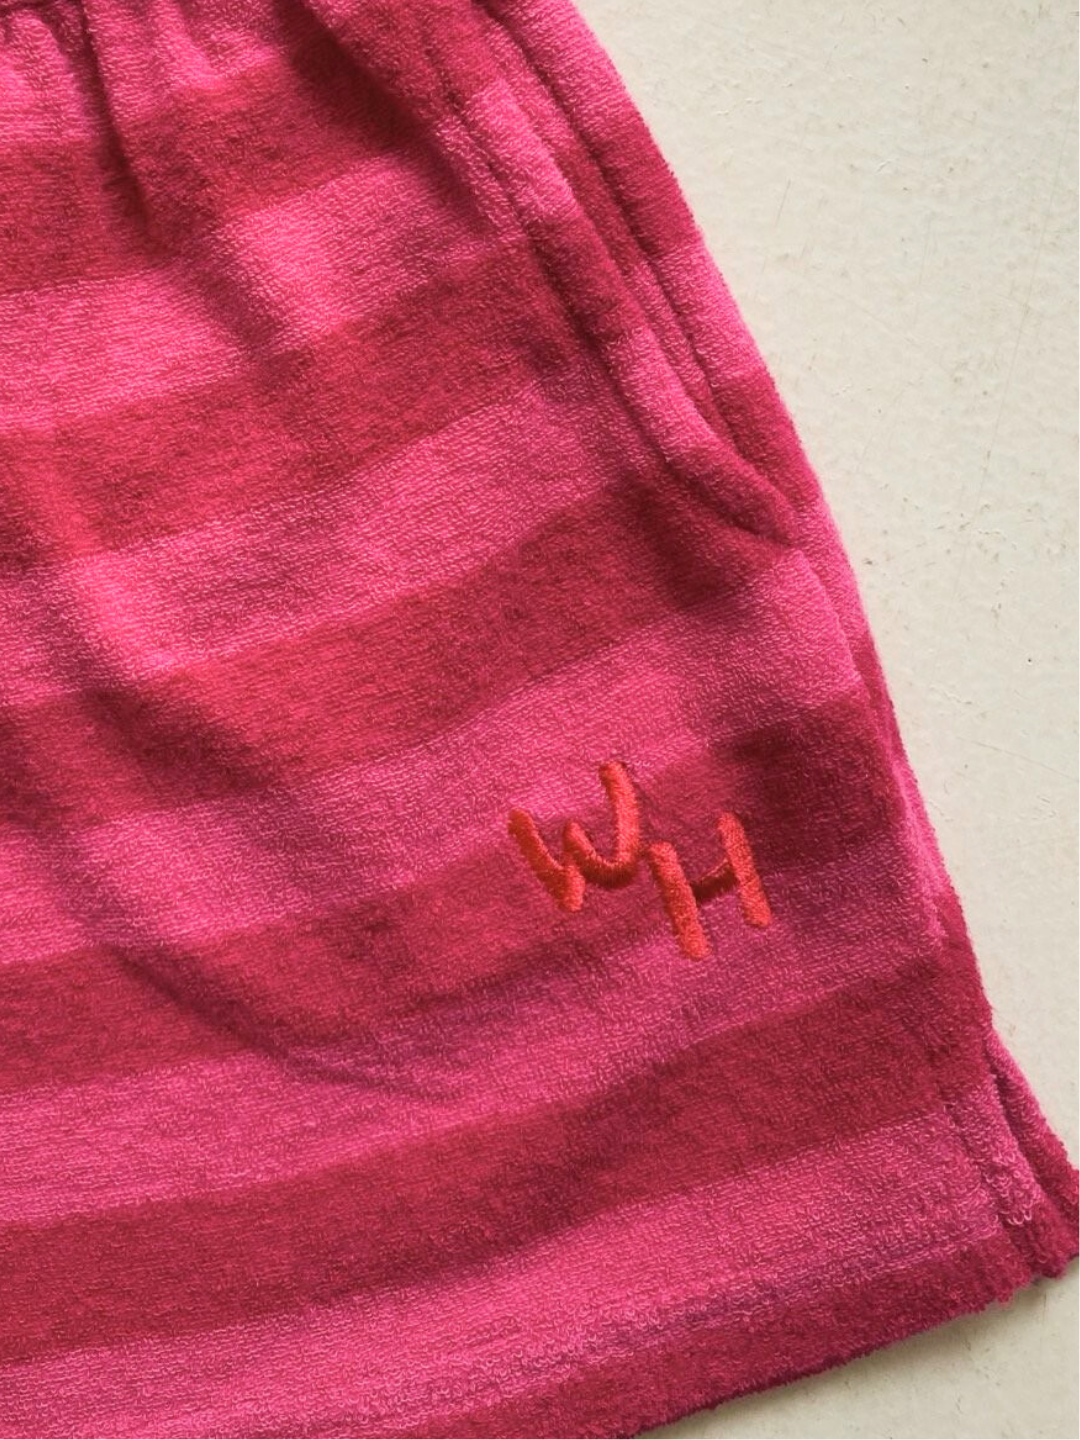 WH embroidered logo on red/pink Riviera shorts